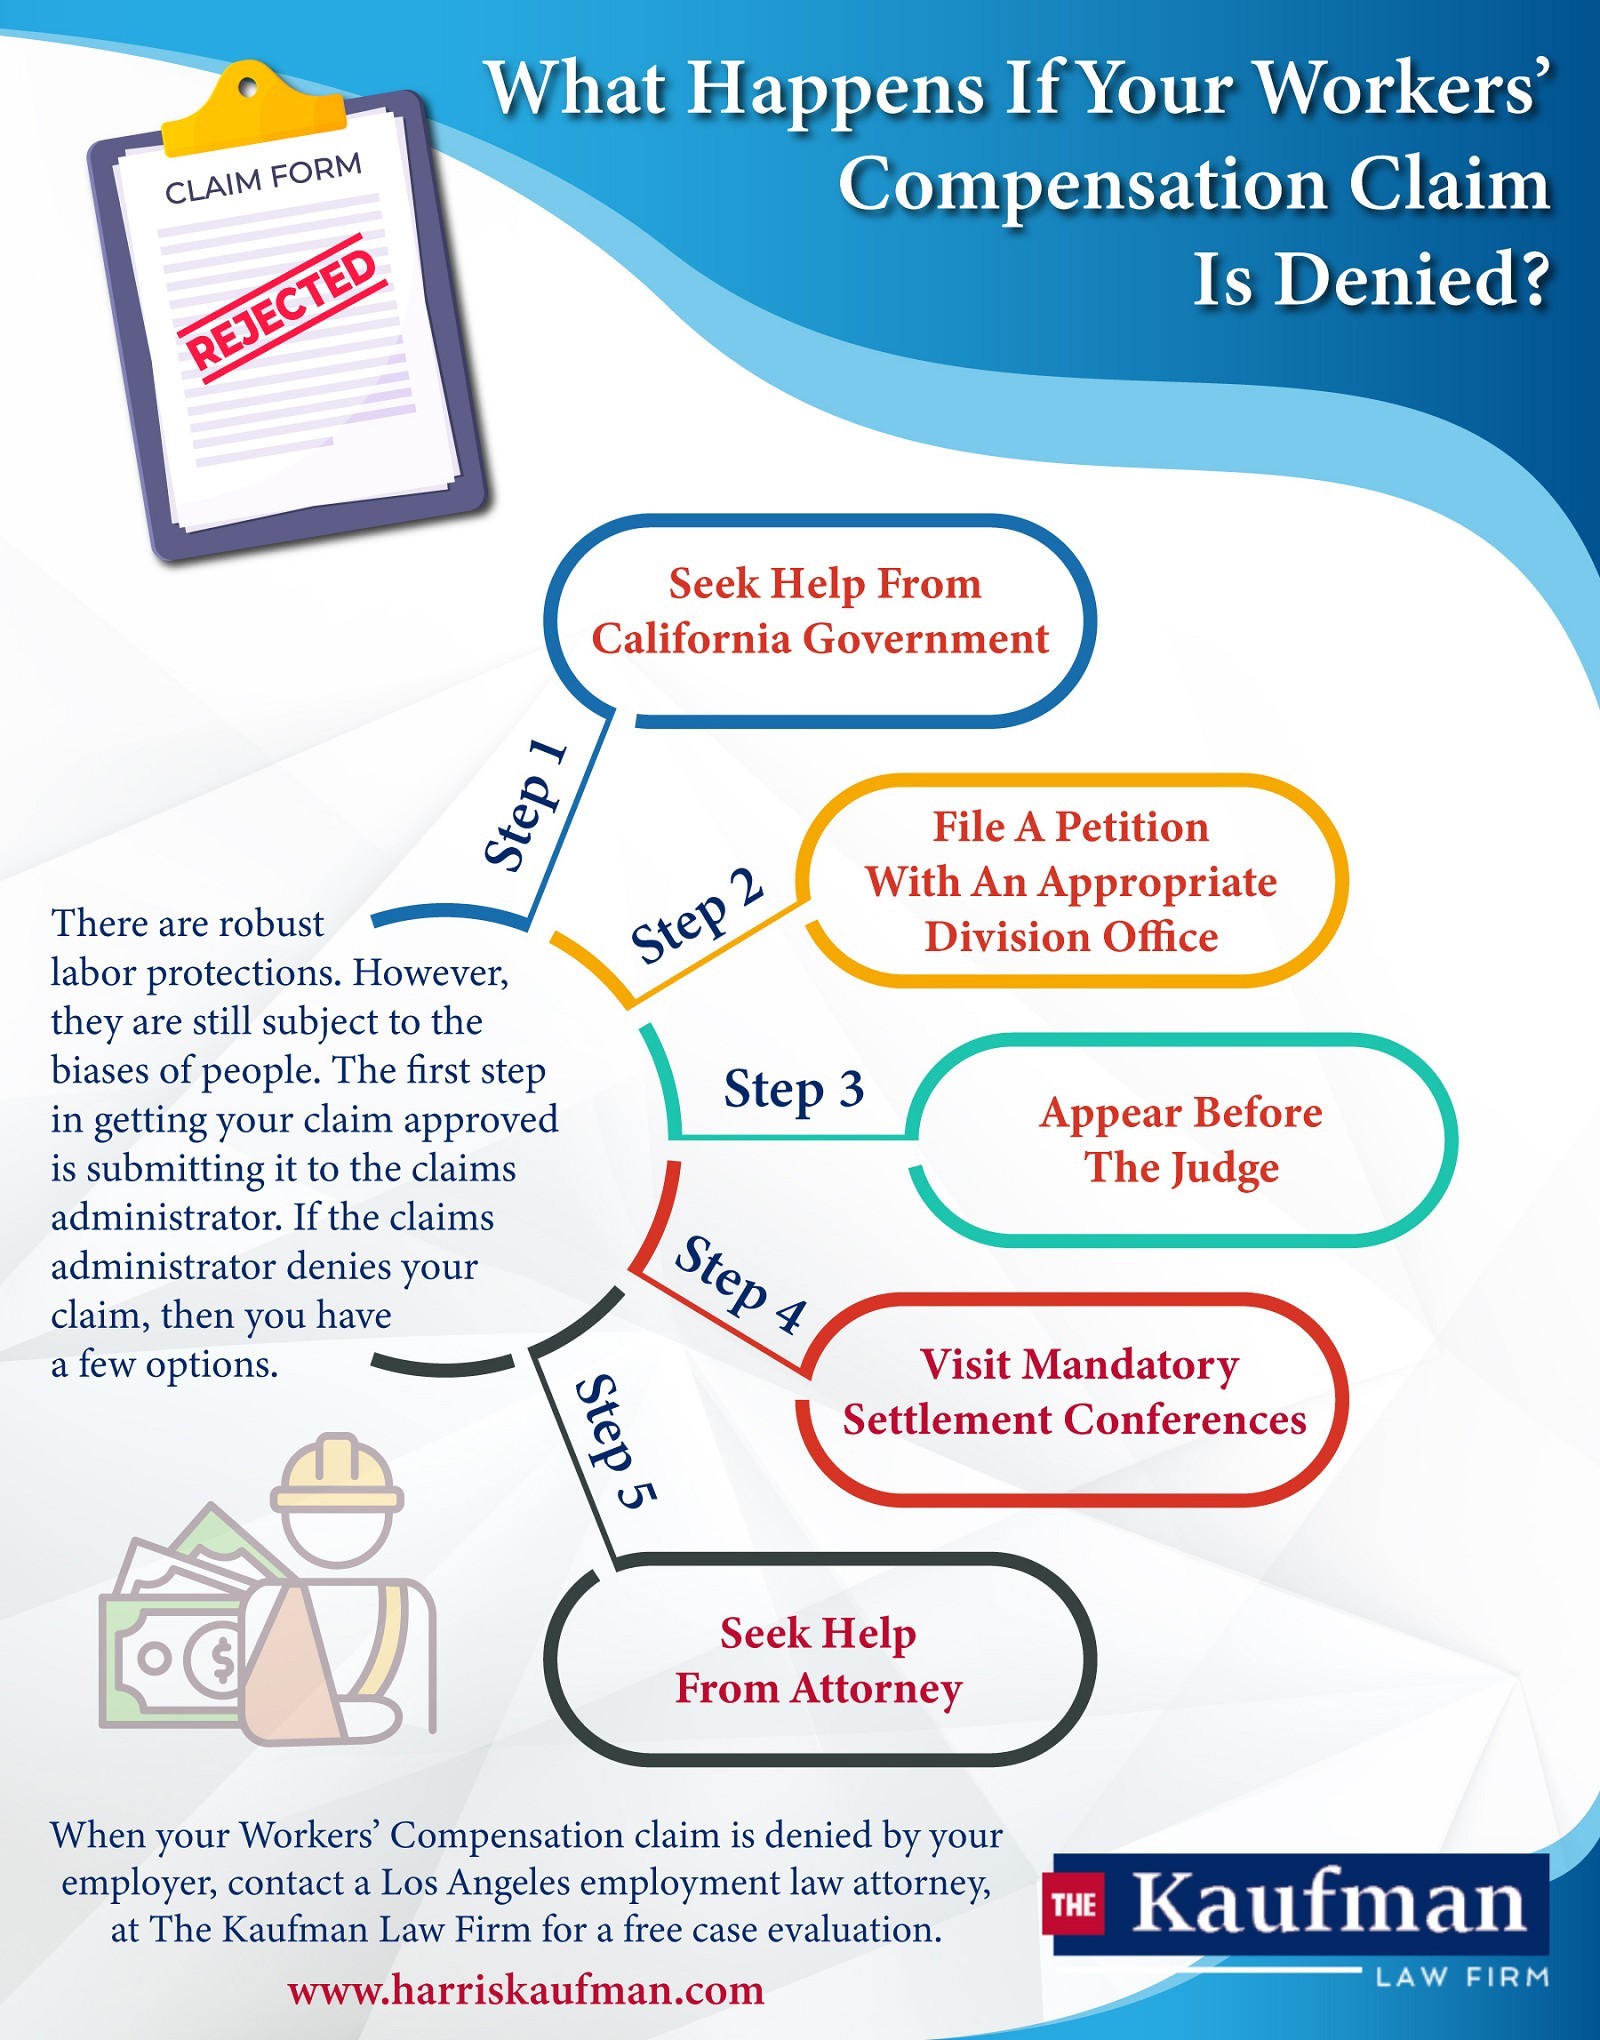 What Happens If Your Workers’ Compensation Claim Is Denied?